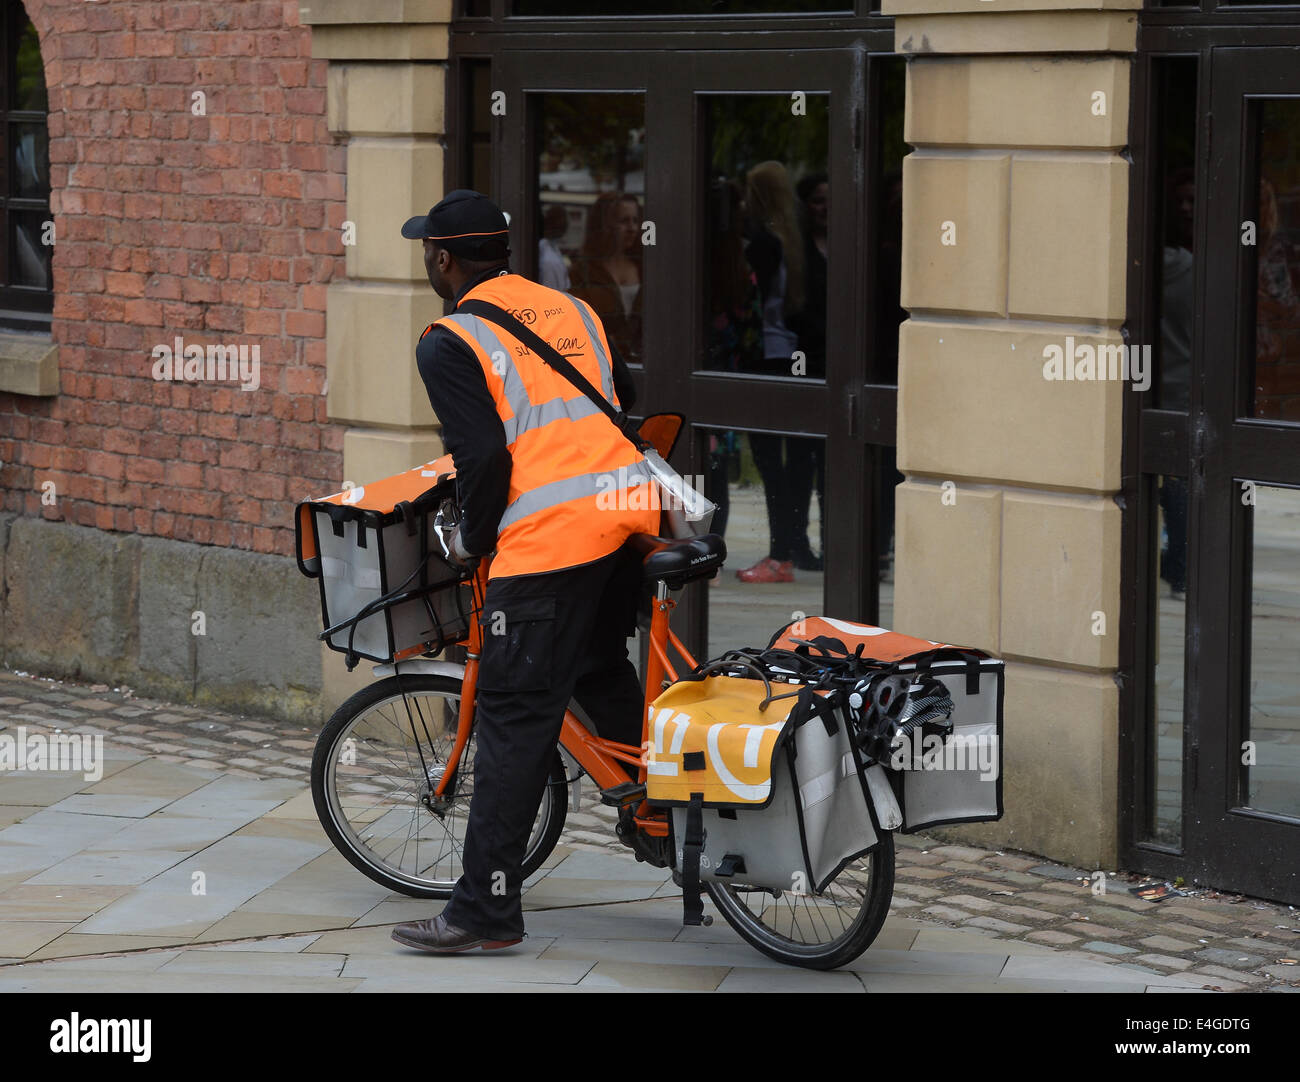 A TNT postman delivers mail to an address in Manchester City Centre, Stock Photo